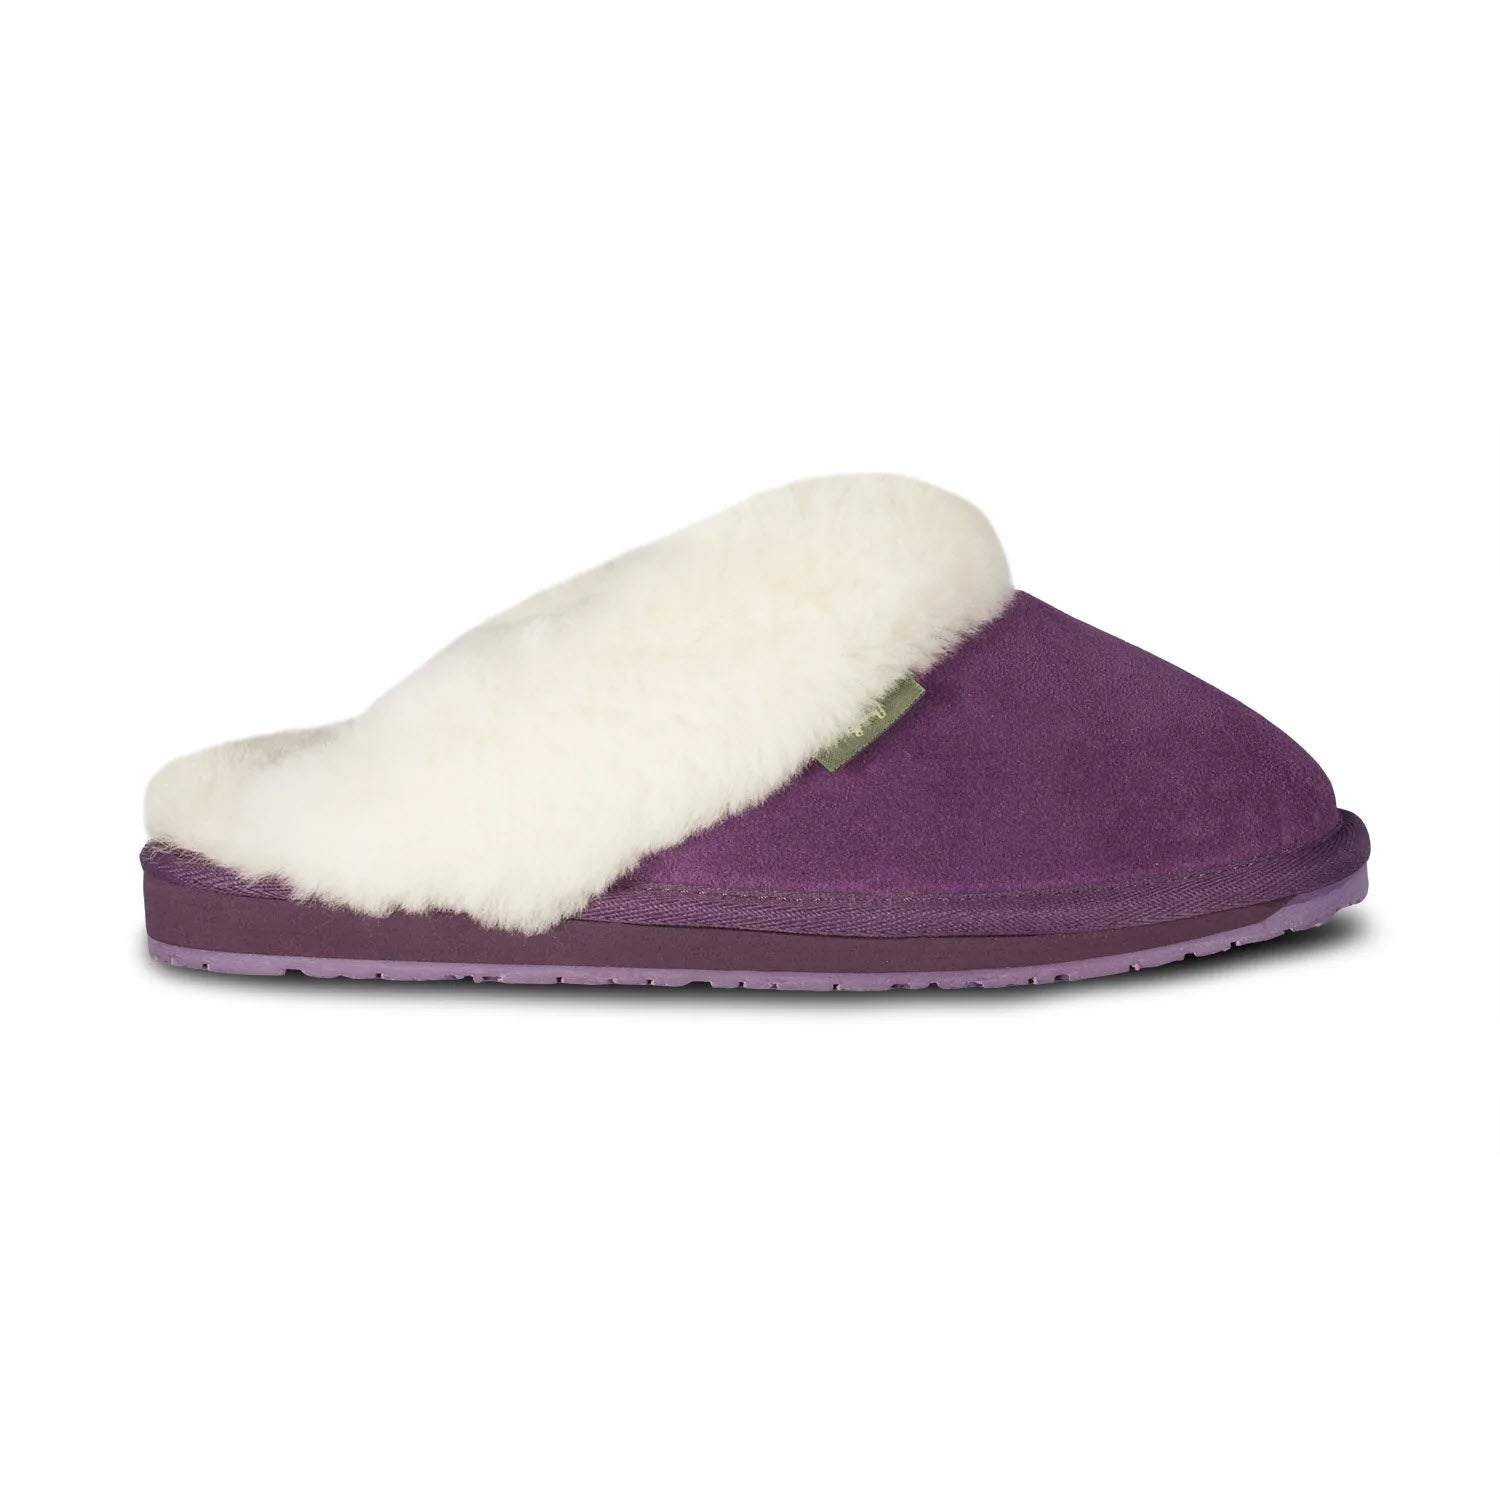 A purple "Cloud Nine Ladies Scuff" slipper with a white sheepskin lining and a thick rubber sole, photographed against a white background.